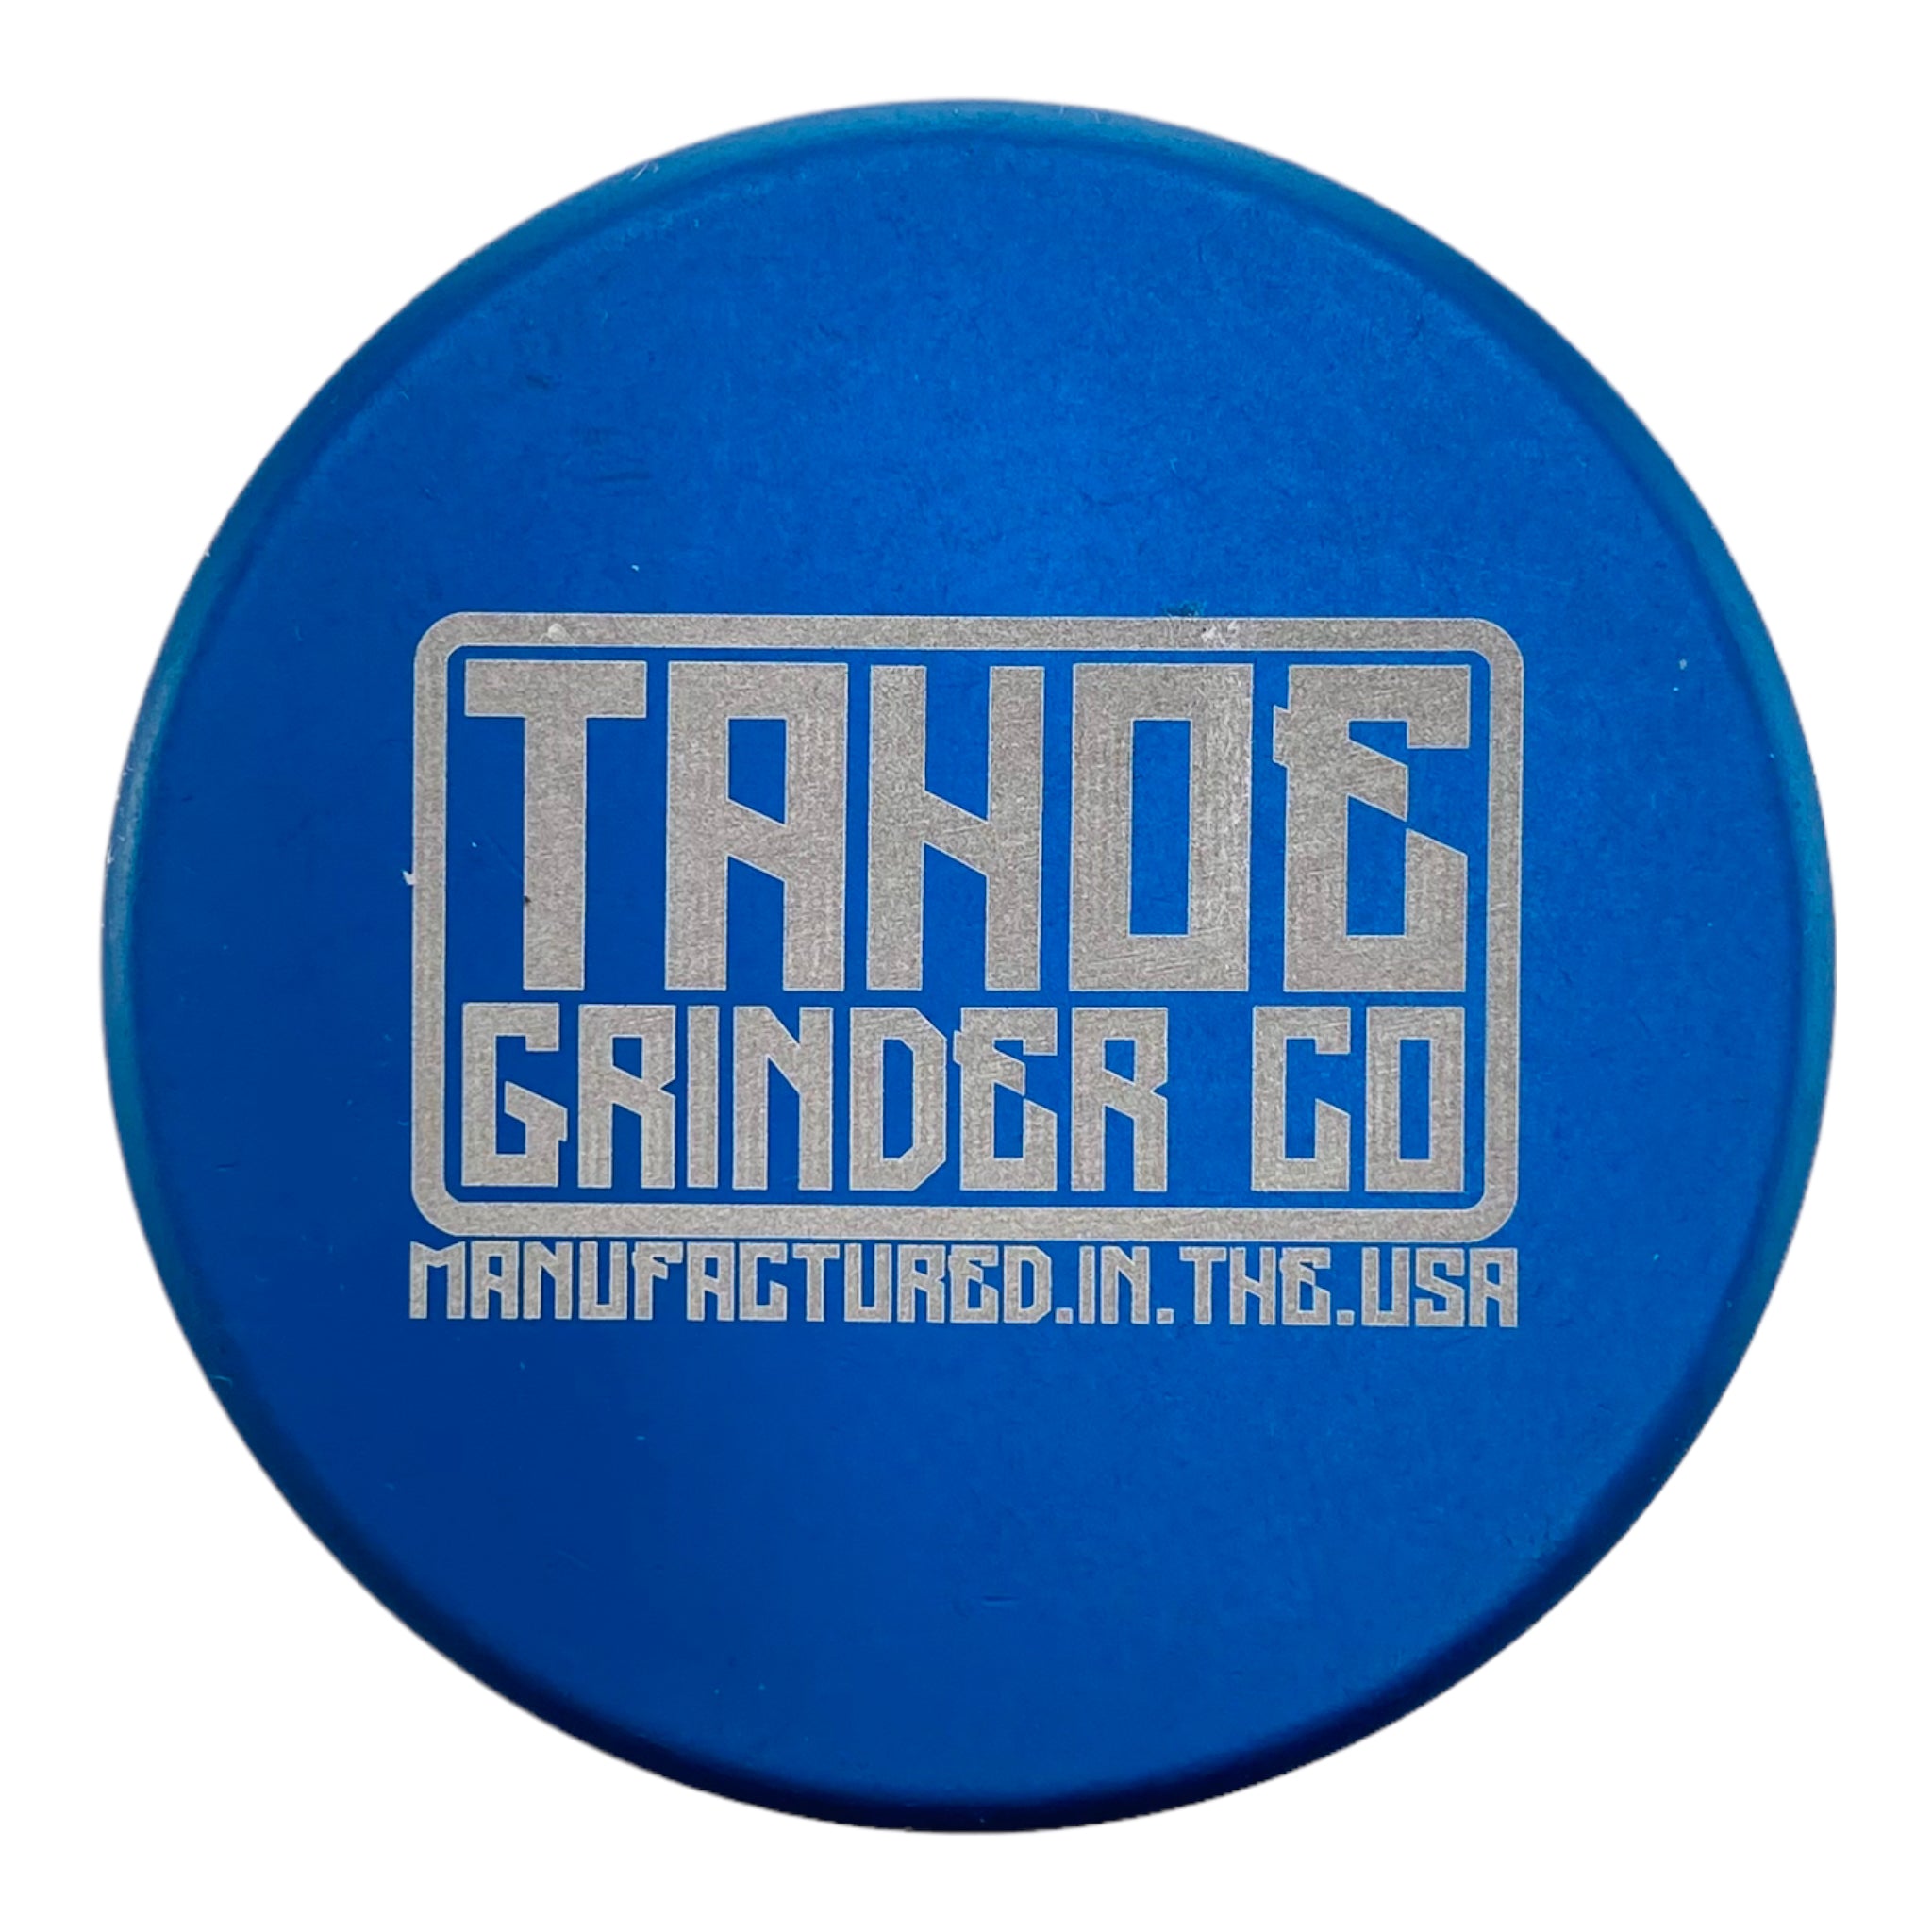 Tahoe Grinders - Blue Anodized Aluminum Large Two Piece Herb Grinder With Cordycep Mushrooms